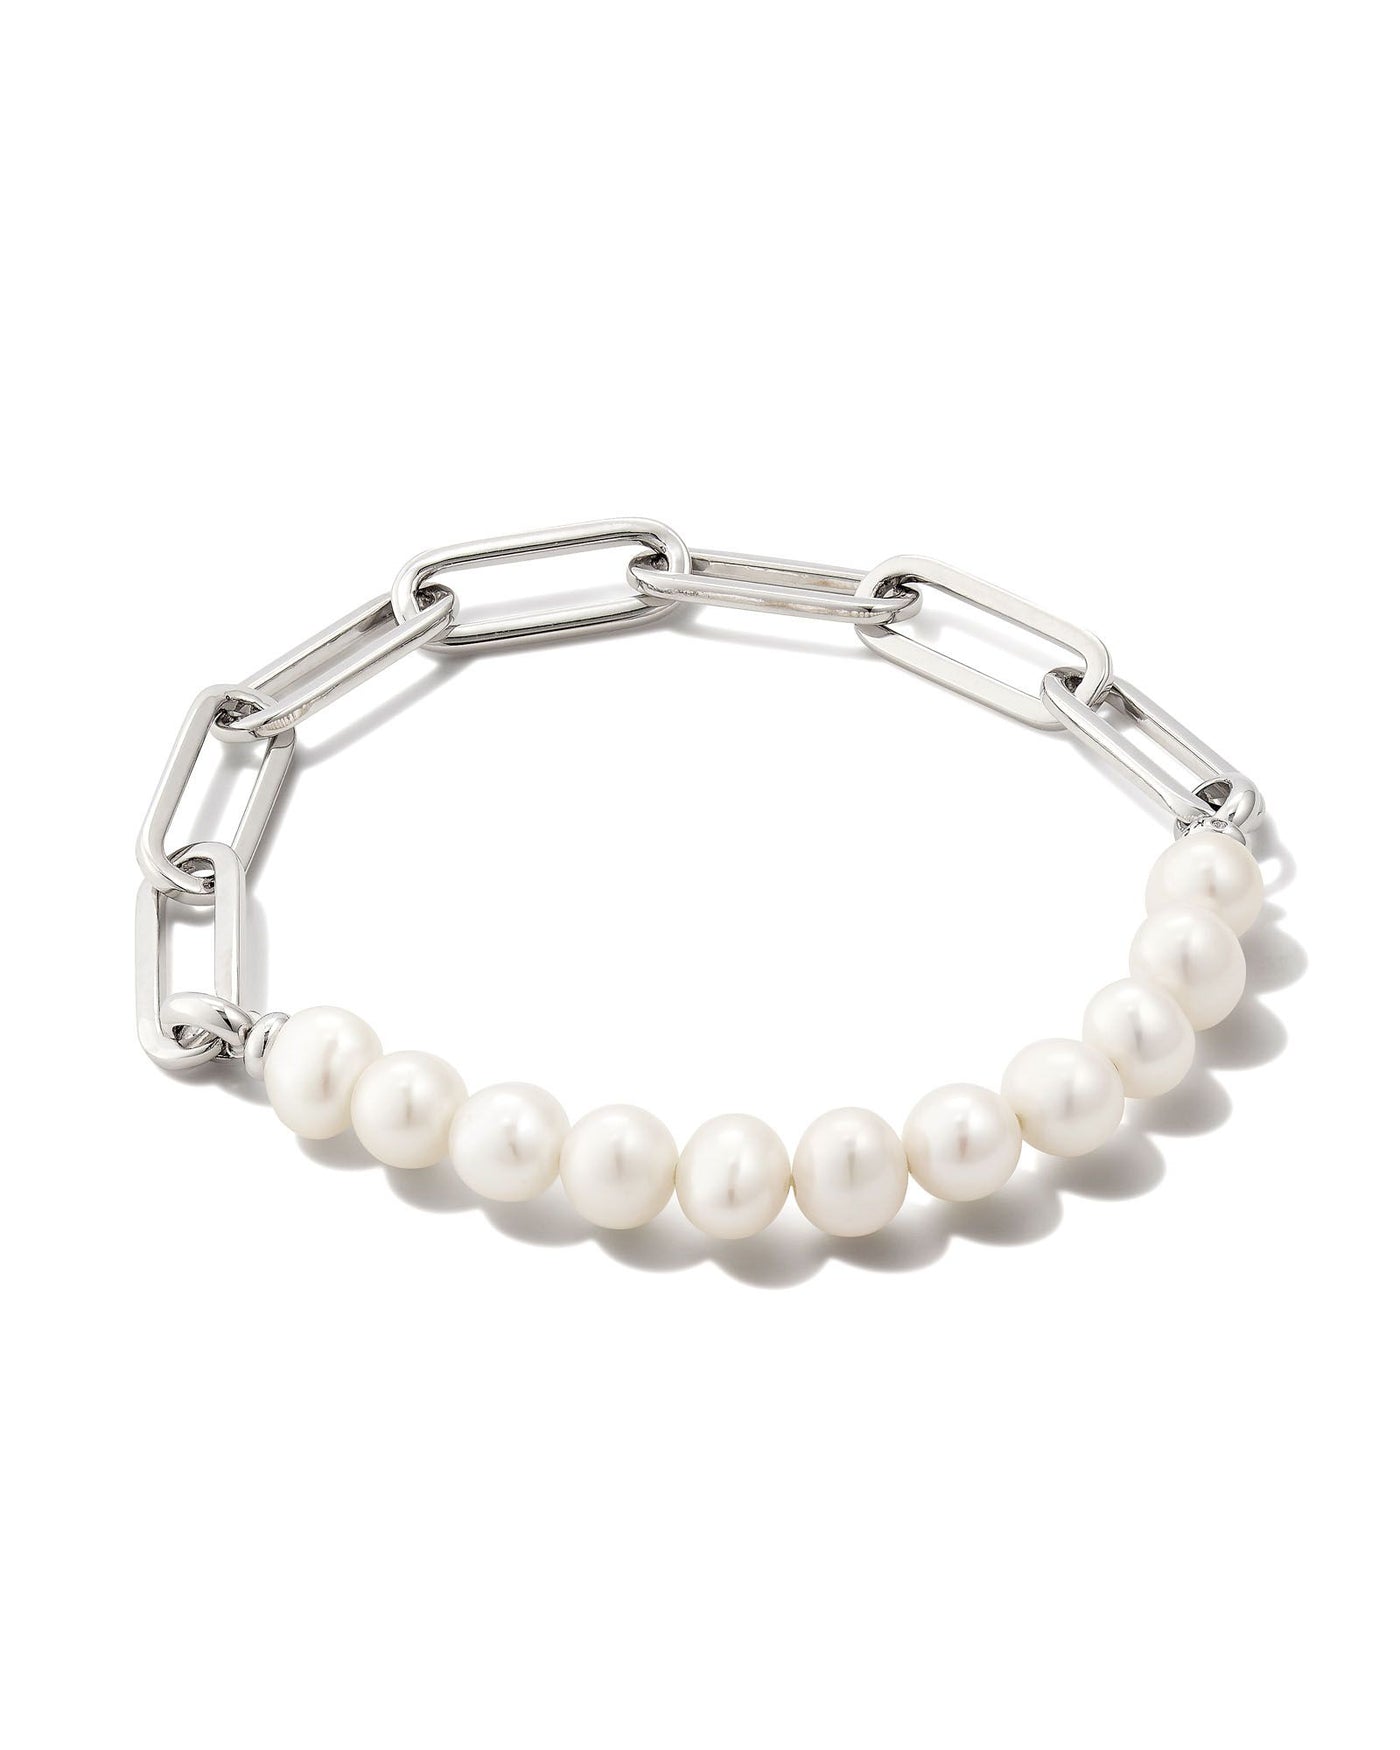 Kendra Scott Ashton Silver Half Chain Bracelet in White Pearl-Bracelets-Kendra Scott-Market Street Nest, Fashionable Clothing, Shoes and Home Décor Located in Mabank, TX